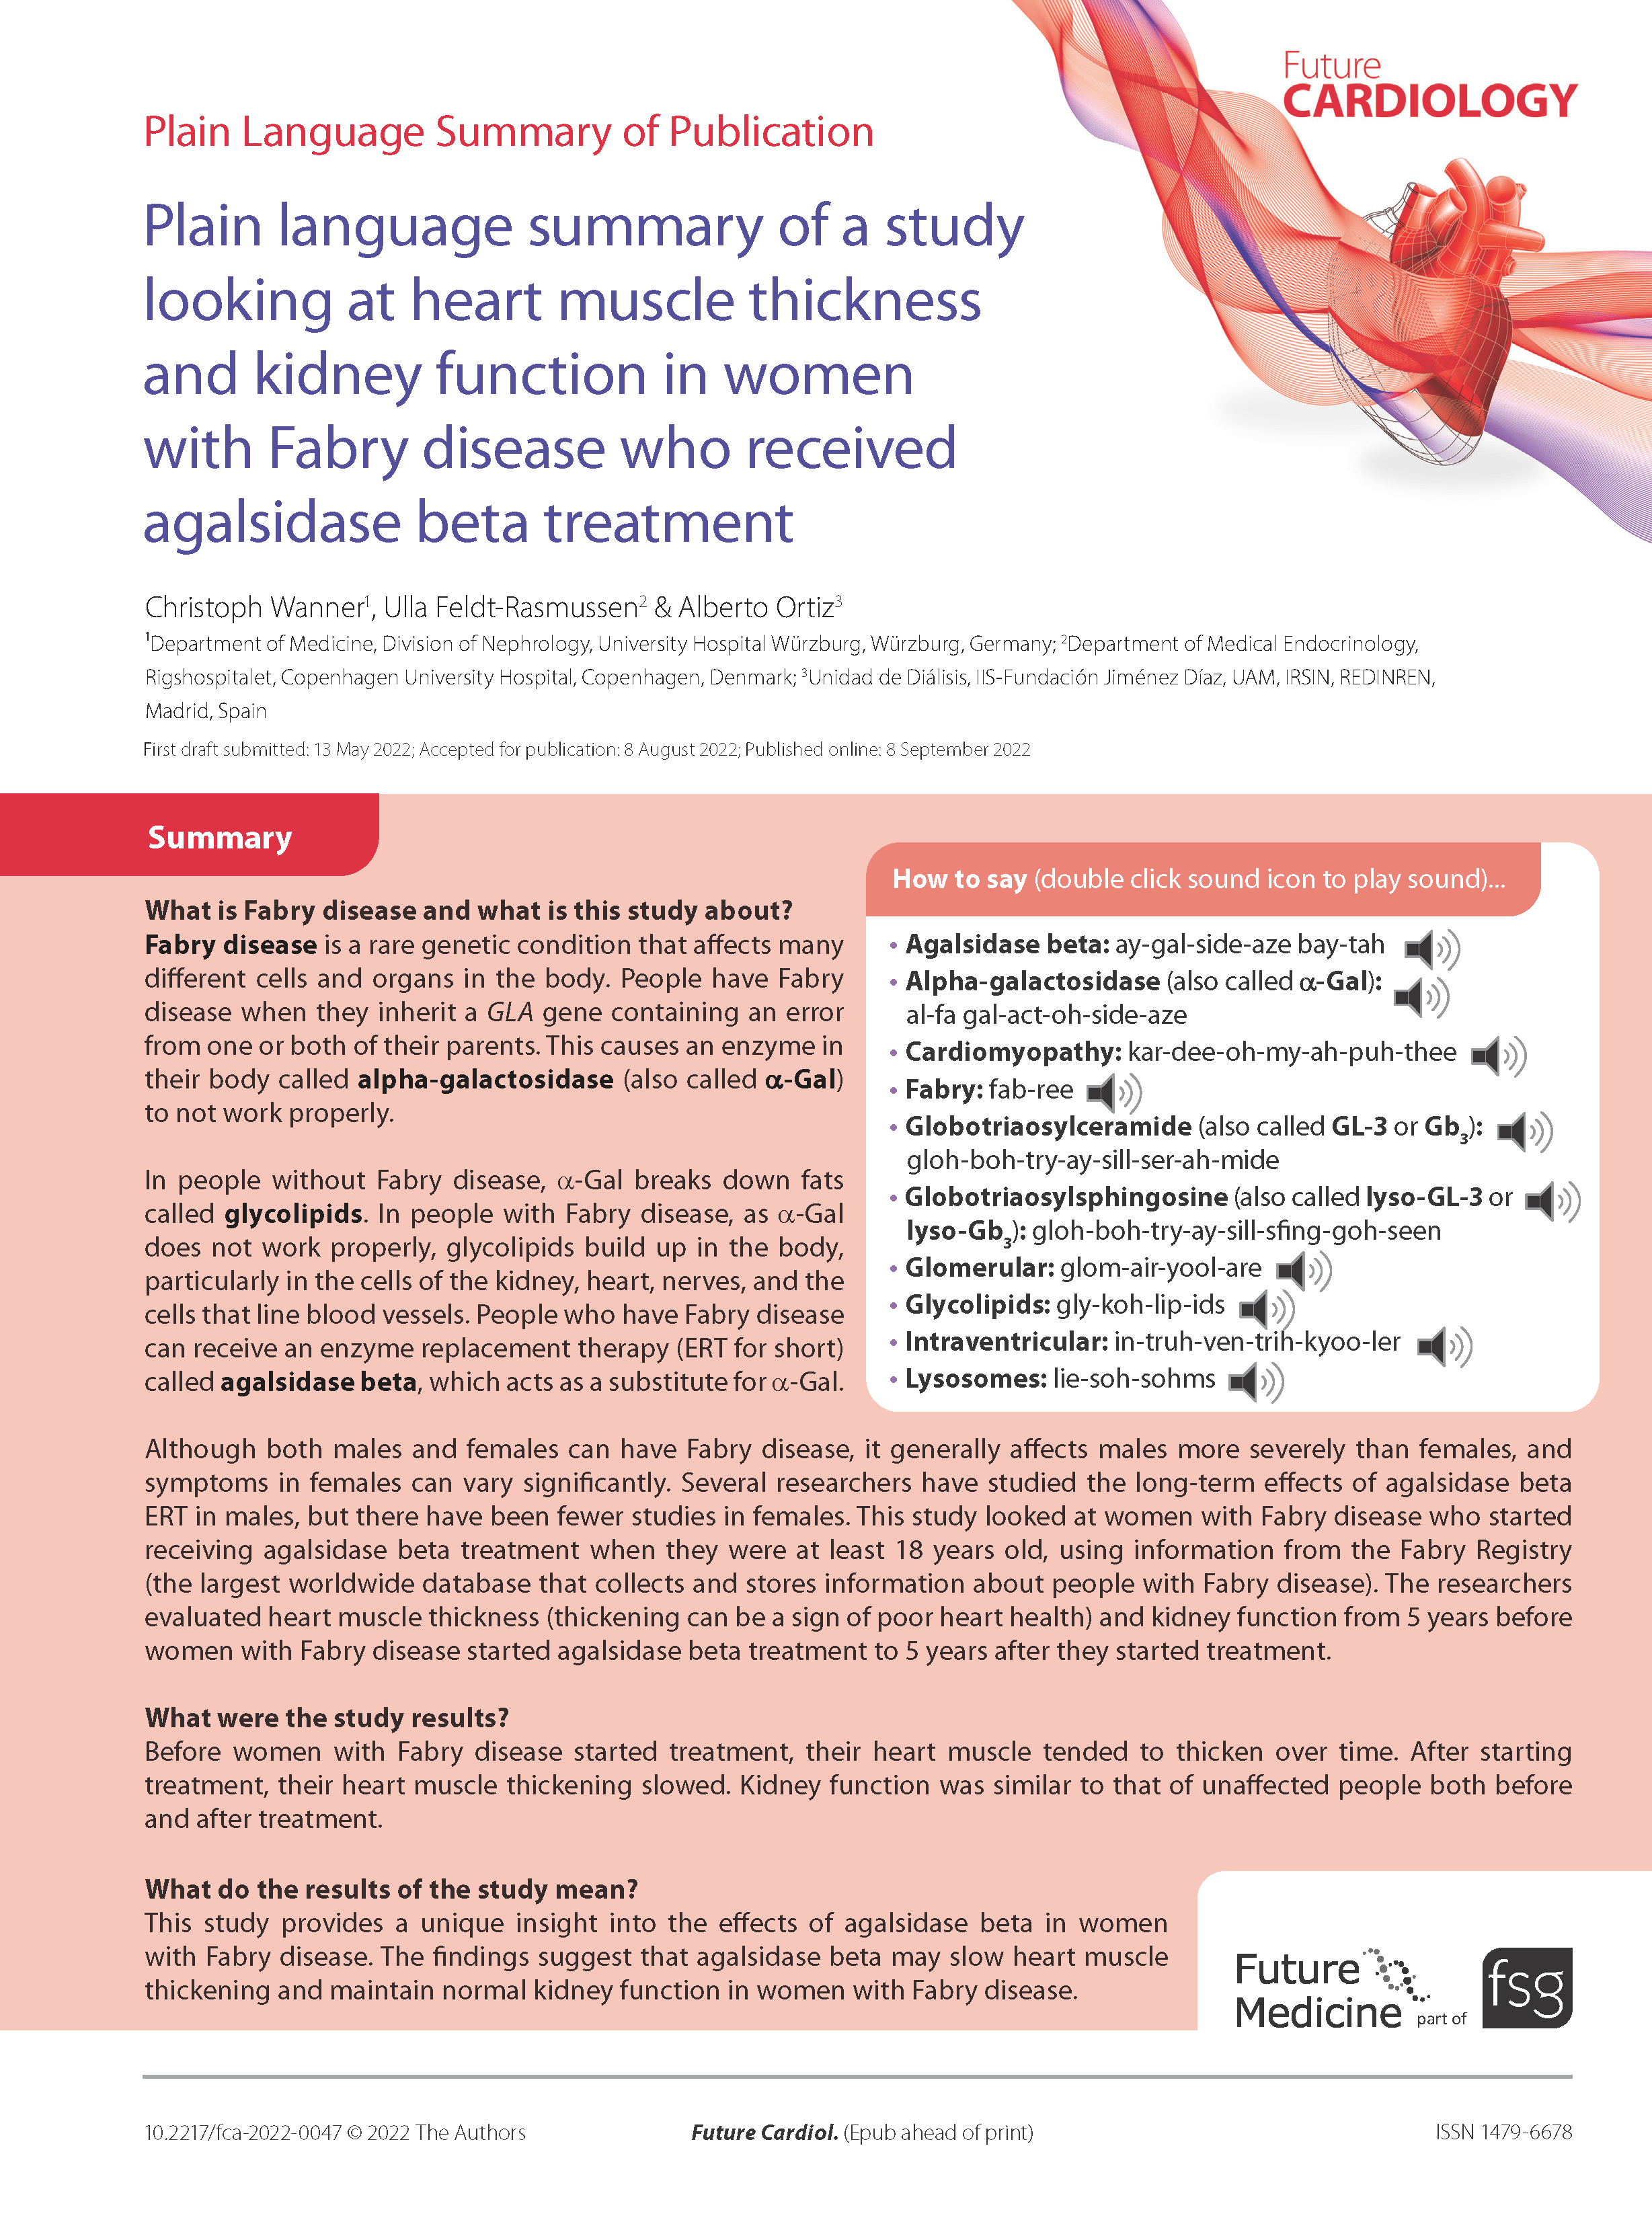 Plain language summary of a study looking at heart muscle thickness and kidney function in women with Fabry disease who received agalsidase beta treatment